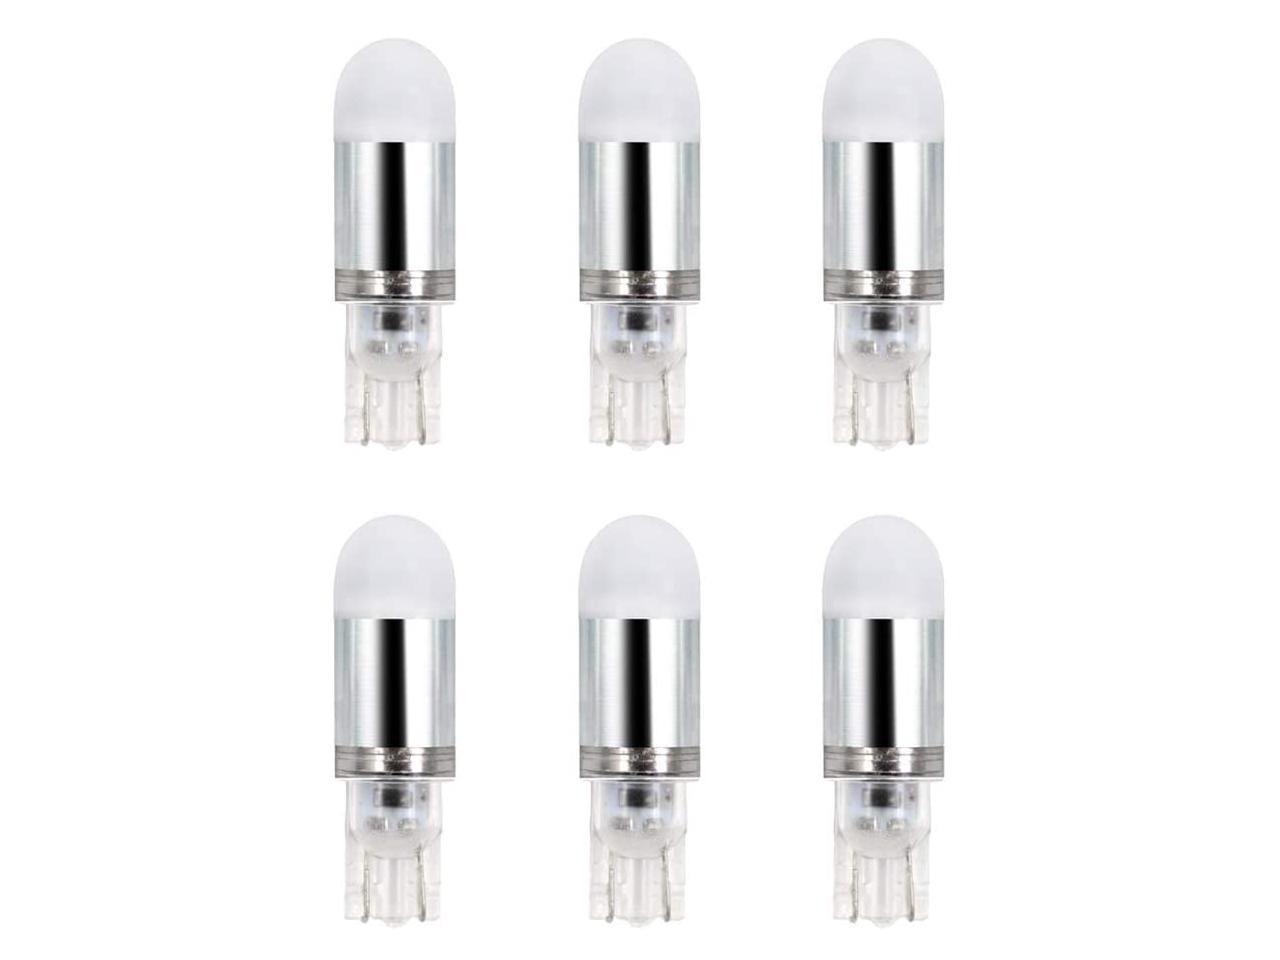 Makergroup T5 T10 Wedge Base LED Light Bulbs 12VAC/DC 2Watt Warm White 2700K-3000K for Outdoor Landscape Lighting Deck Stair Step Path Lights and Automotive RV Travel Tailer Lights 6-Pack 